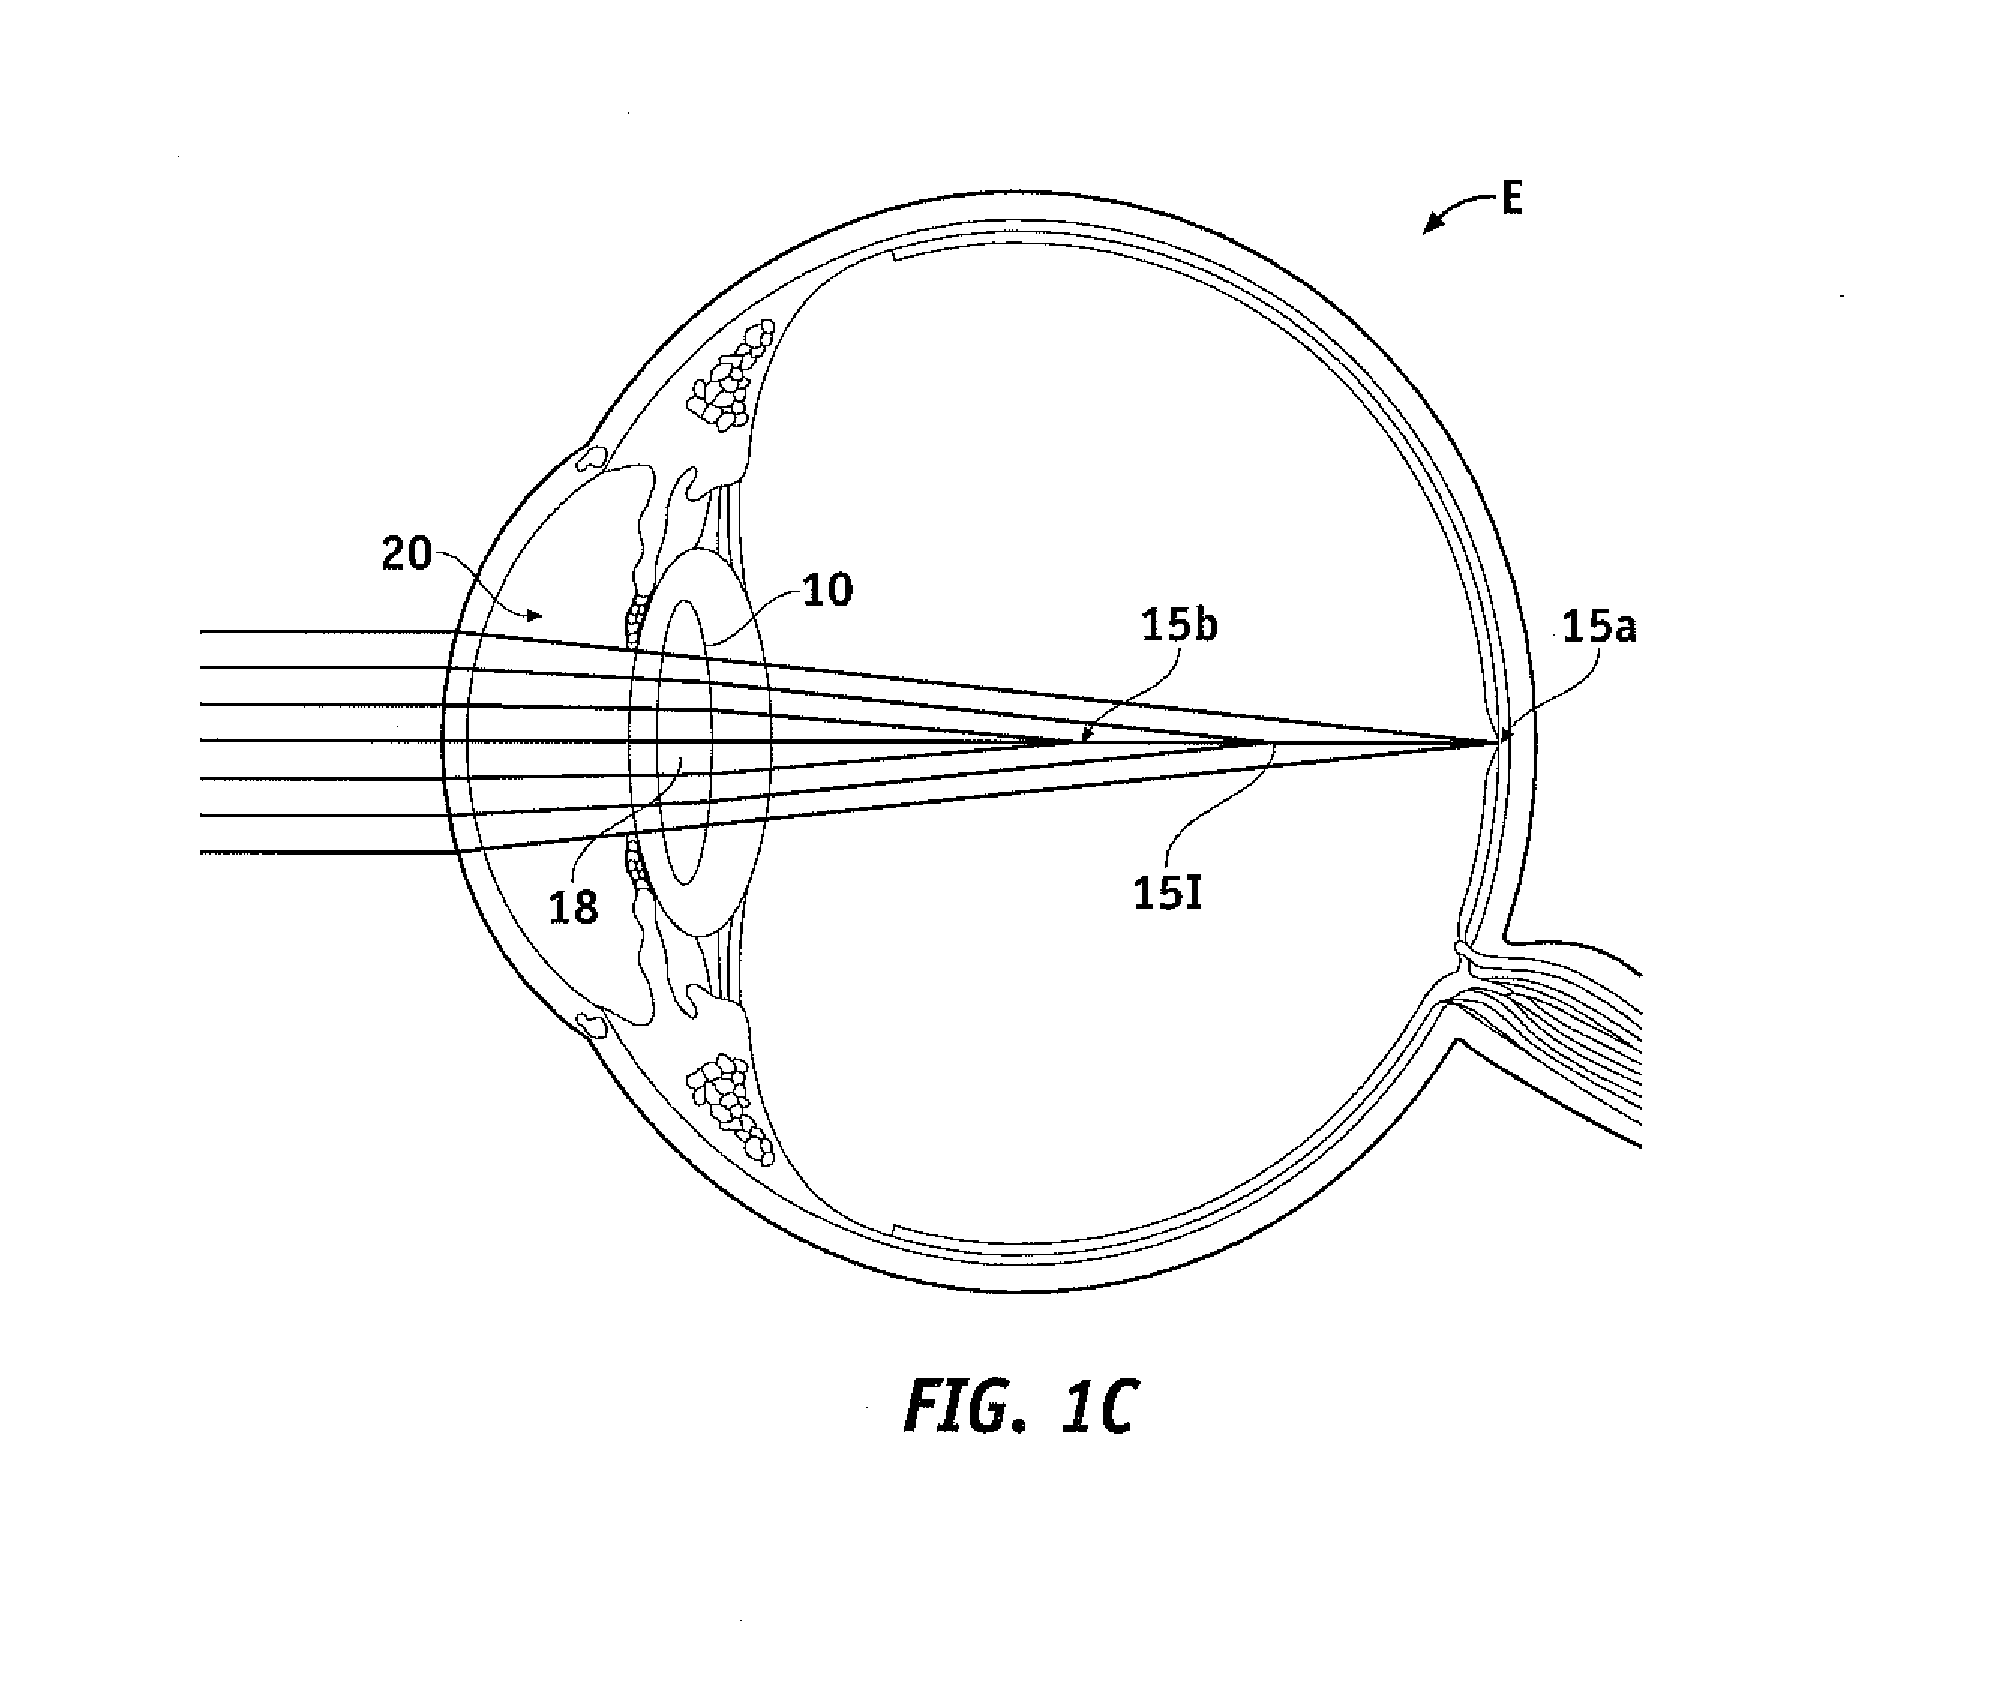 Pupil dependent diffractive lens for near, intermediate, and far vision